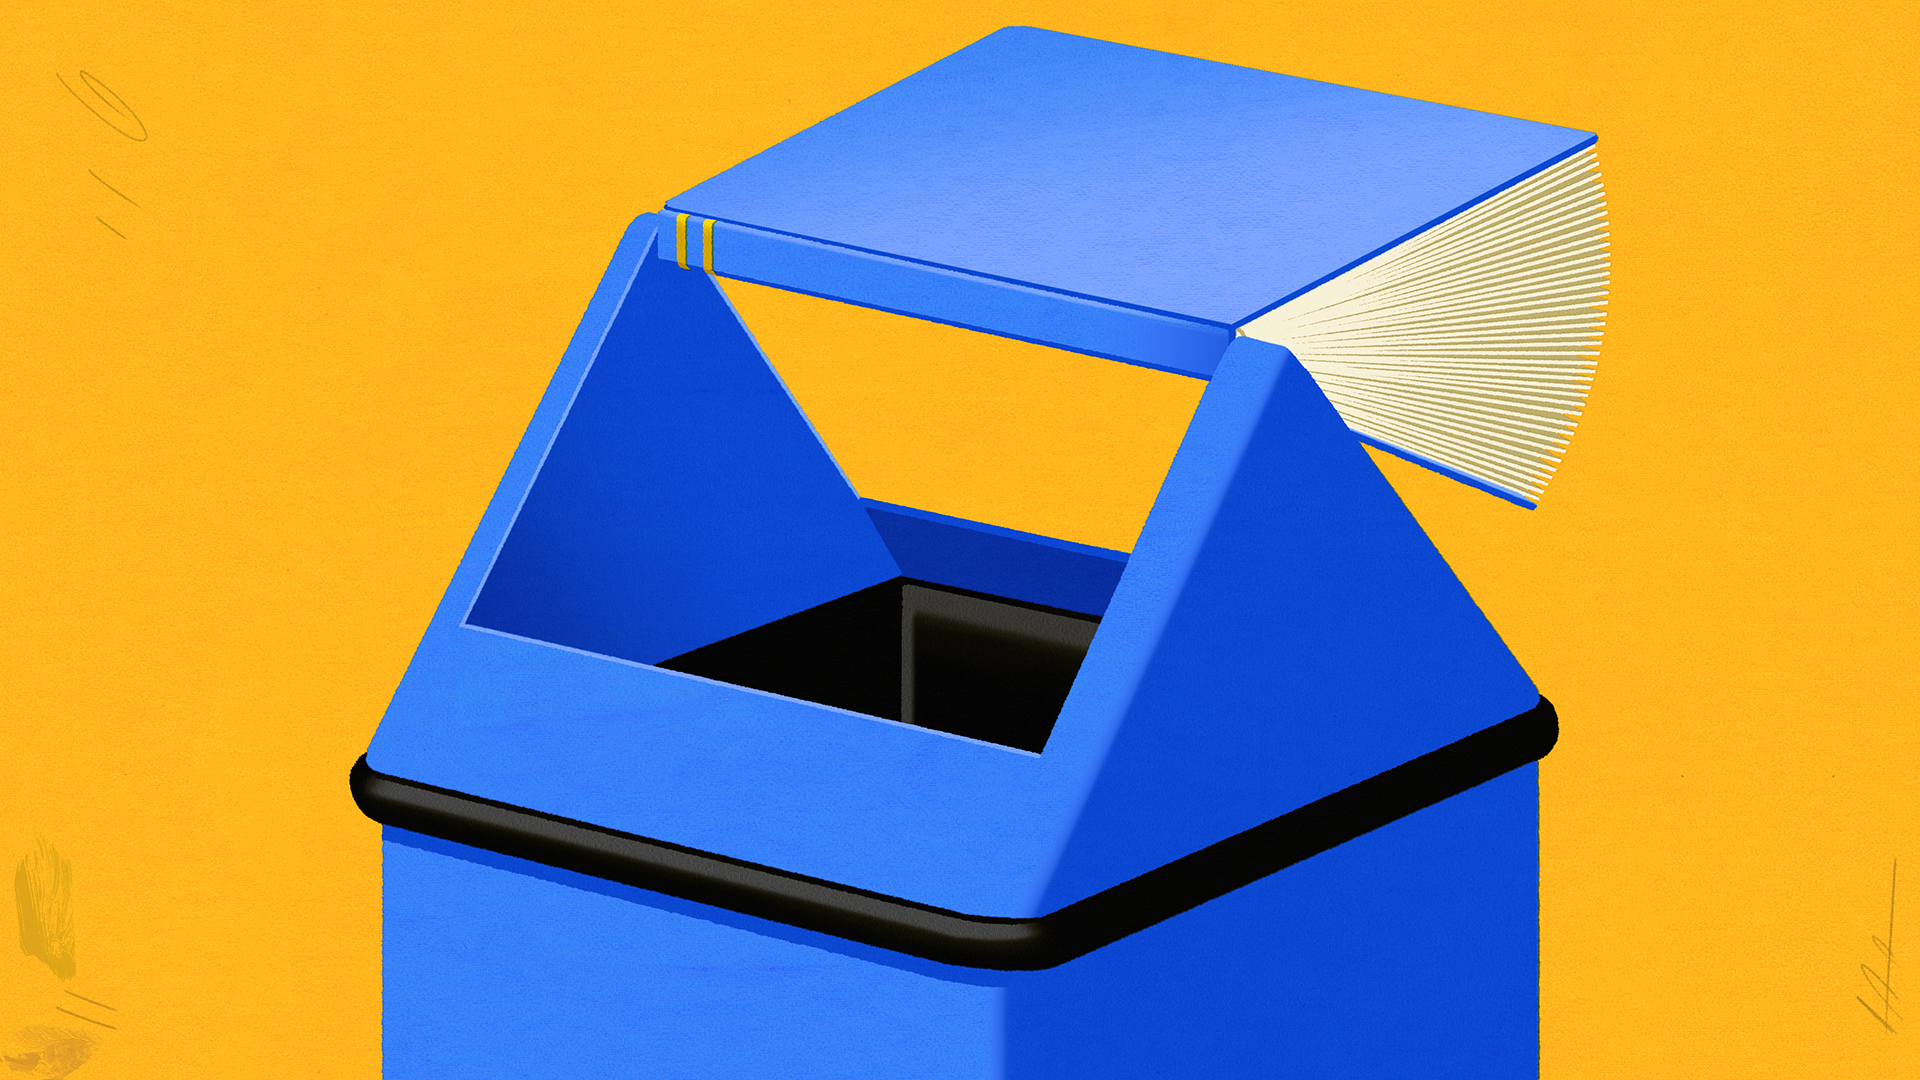 An illustration of a blue garbage can stands against a yellow background. The flip lid of the garbage can is swinging to the right, and we can see that it’s a book.